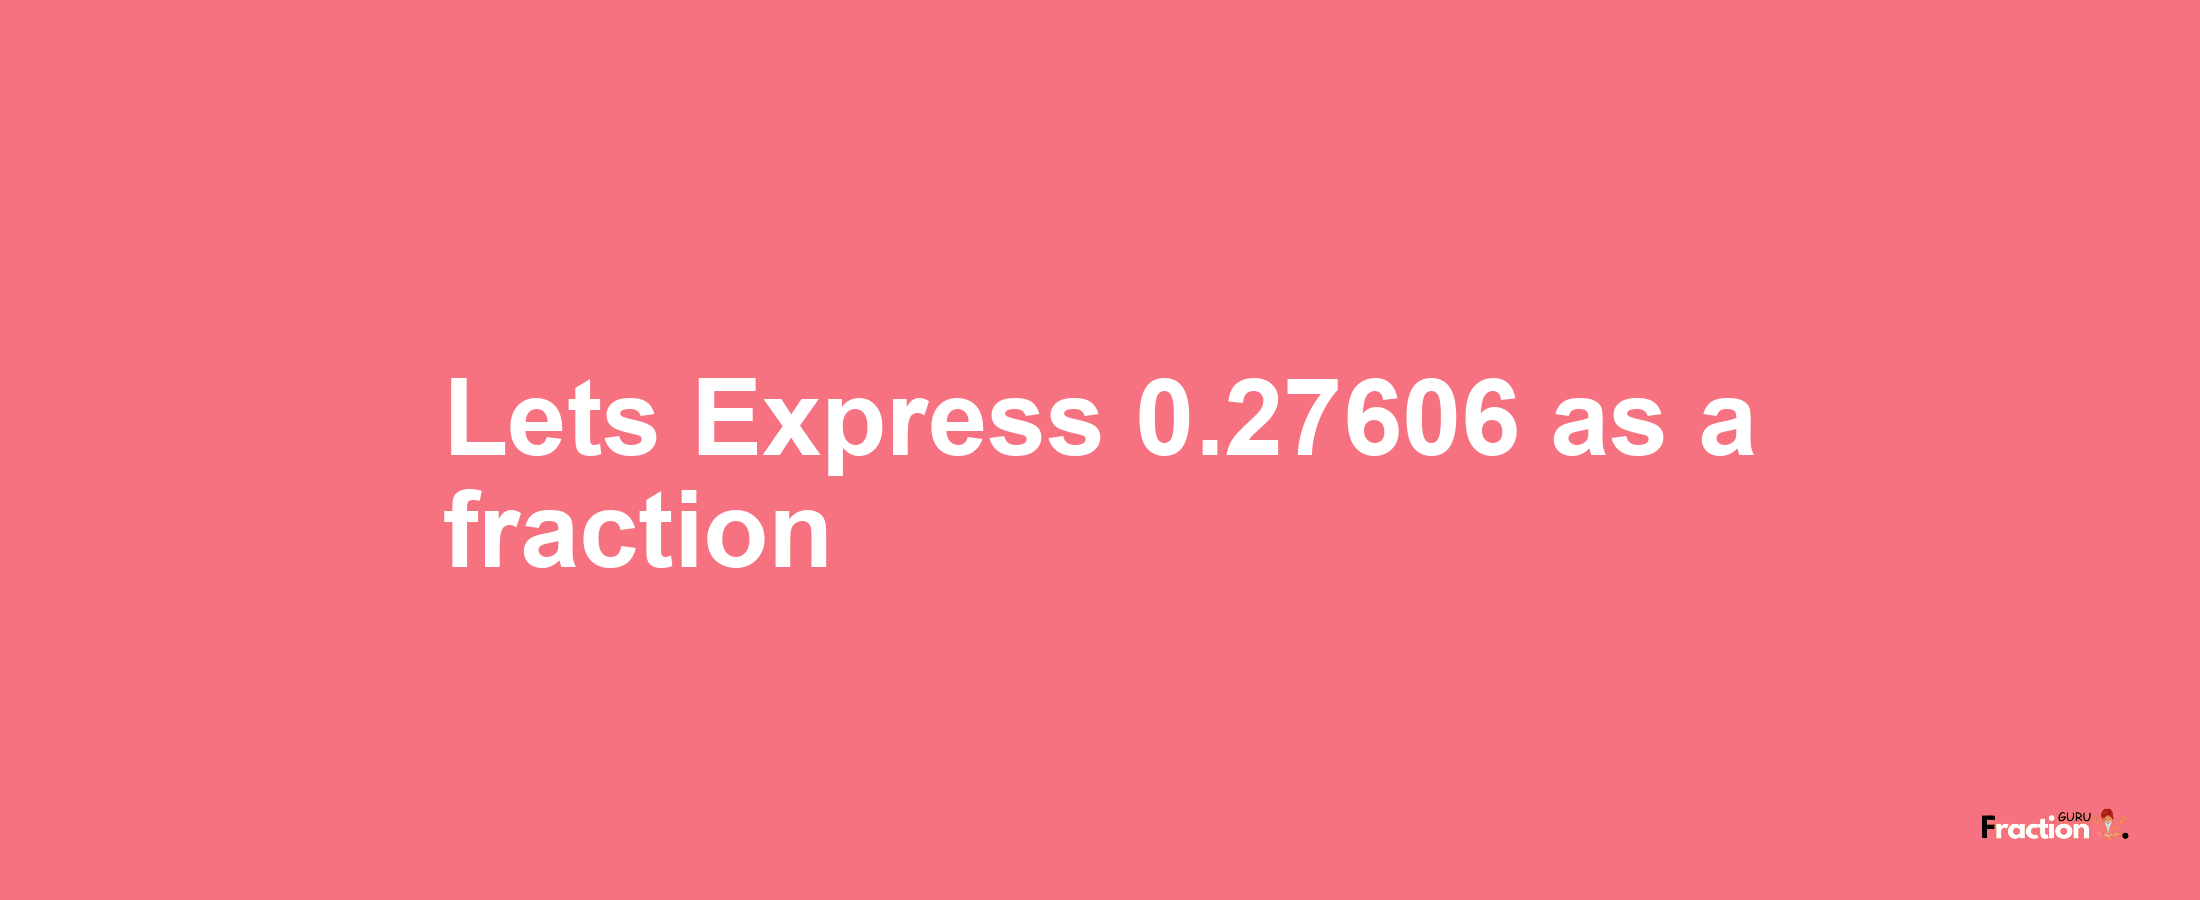 Lets Express 0.27606 as afraction